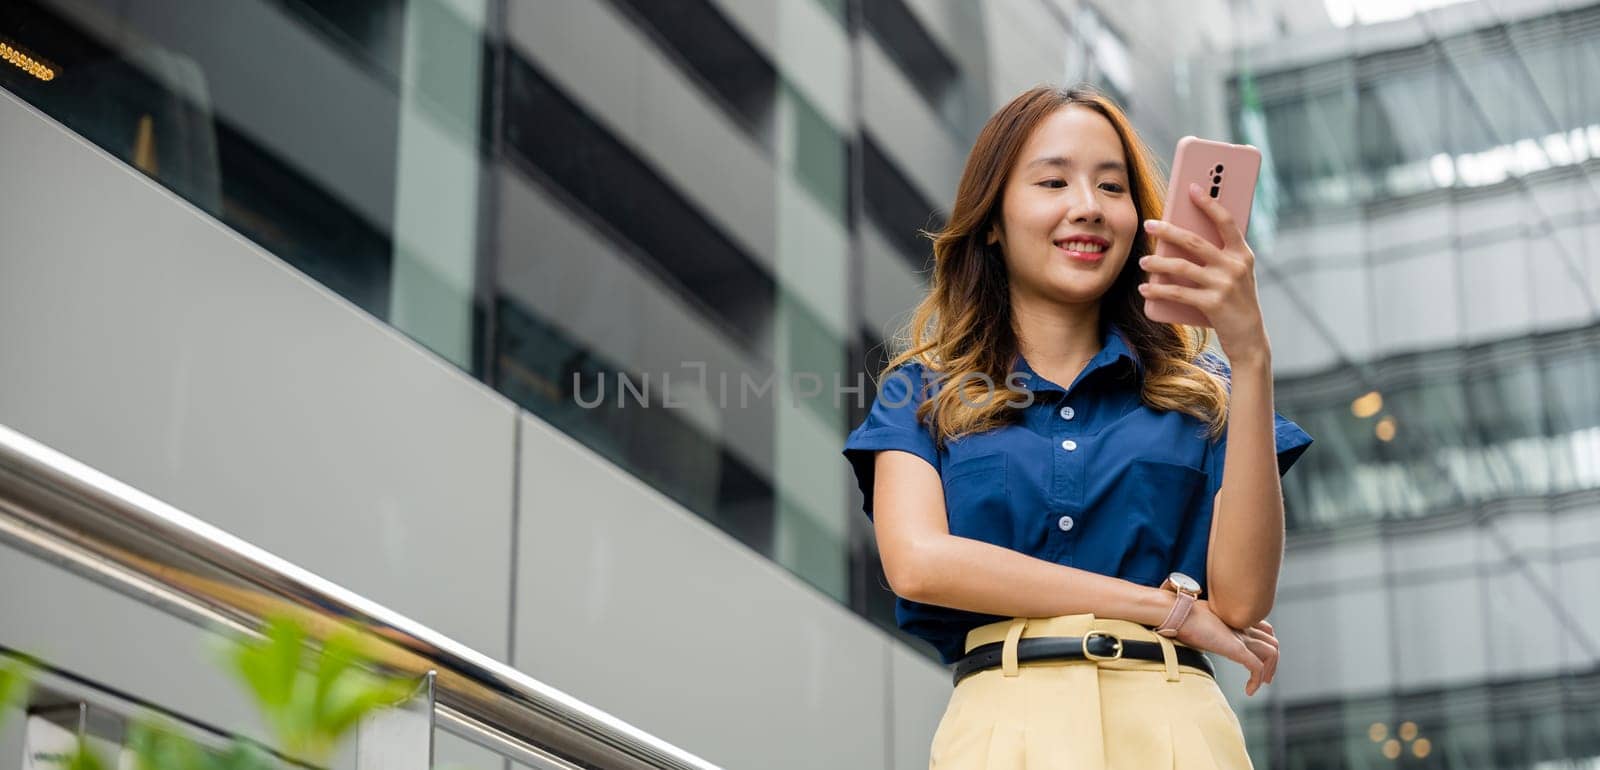 Young woman walking in the city with blue shirt and using smartphone. Girl using smart phone app for messaging, browsing and shopping.